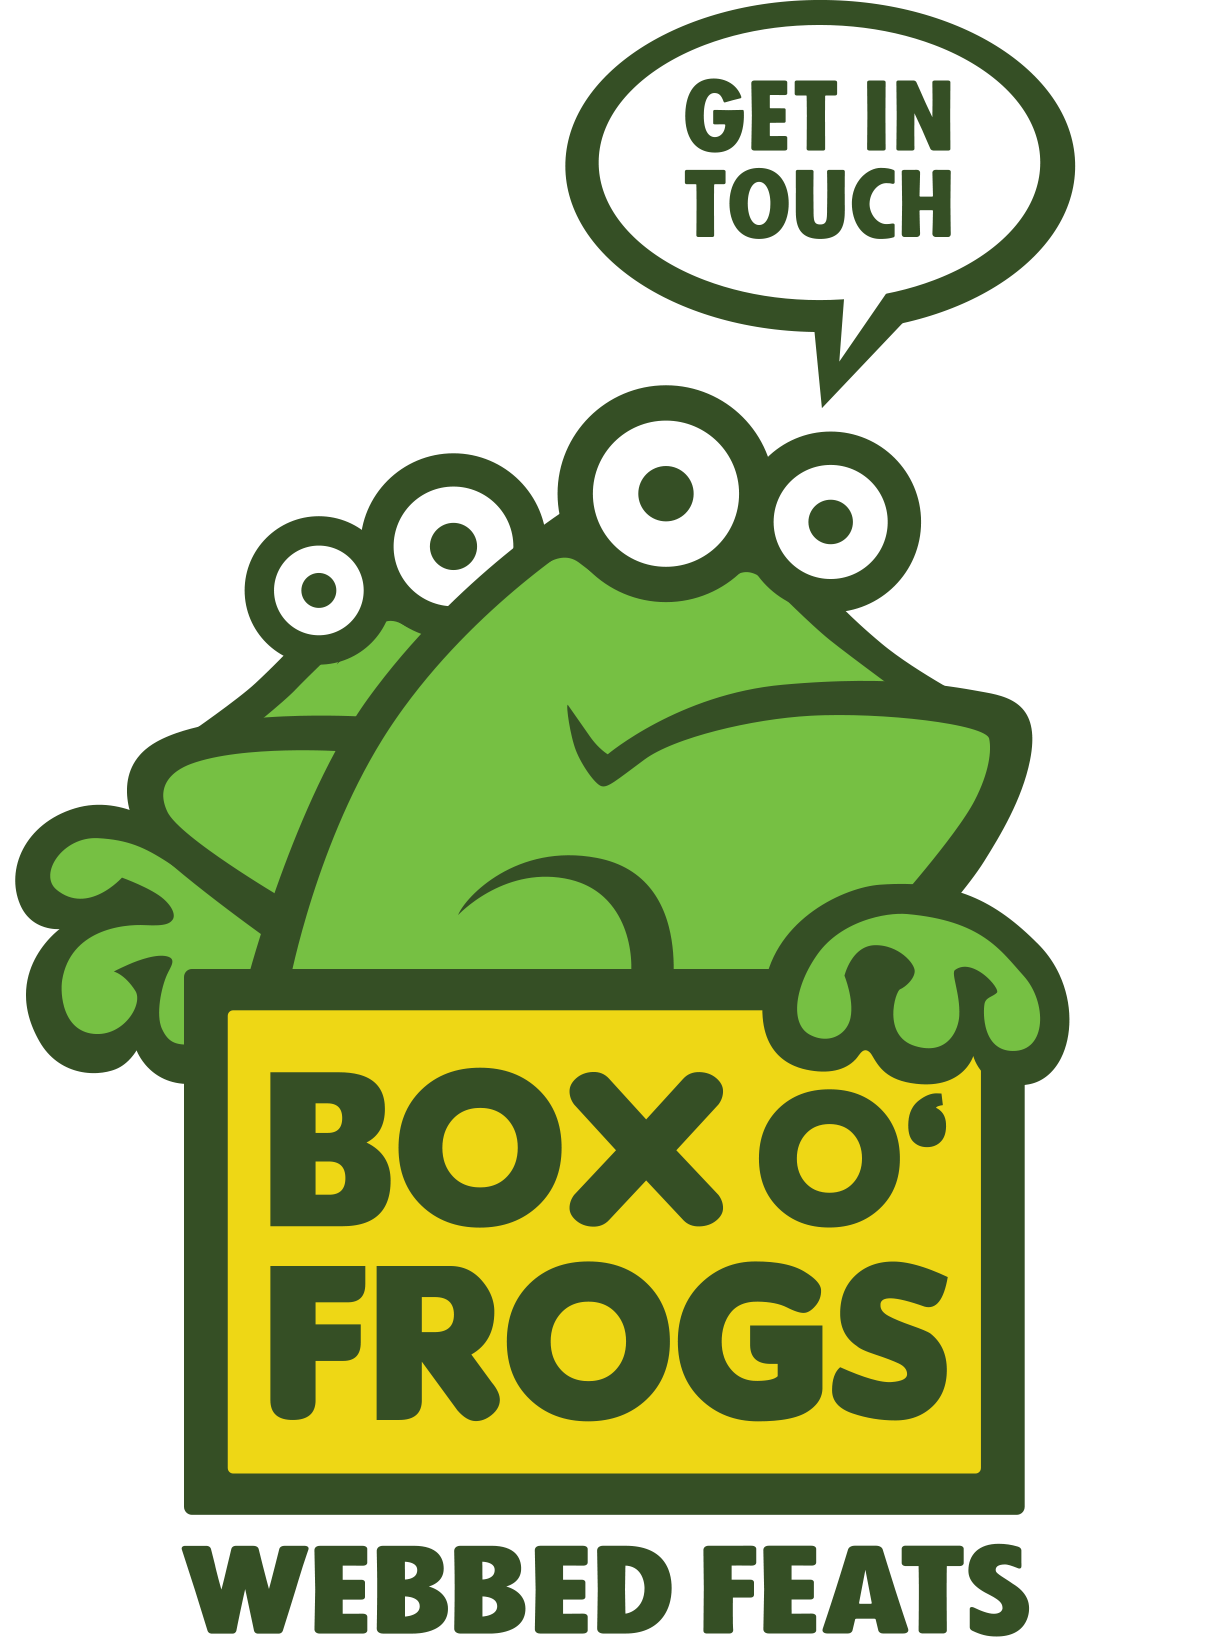 Box o' Frogs